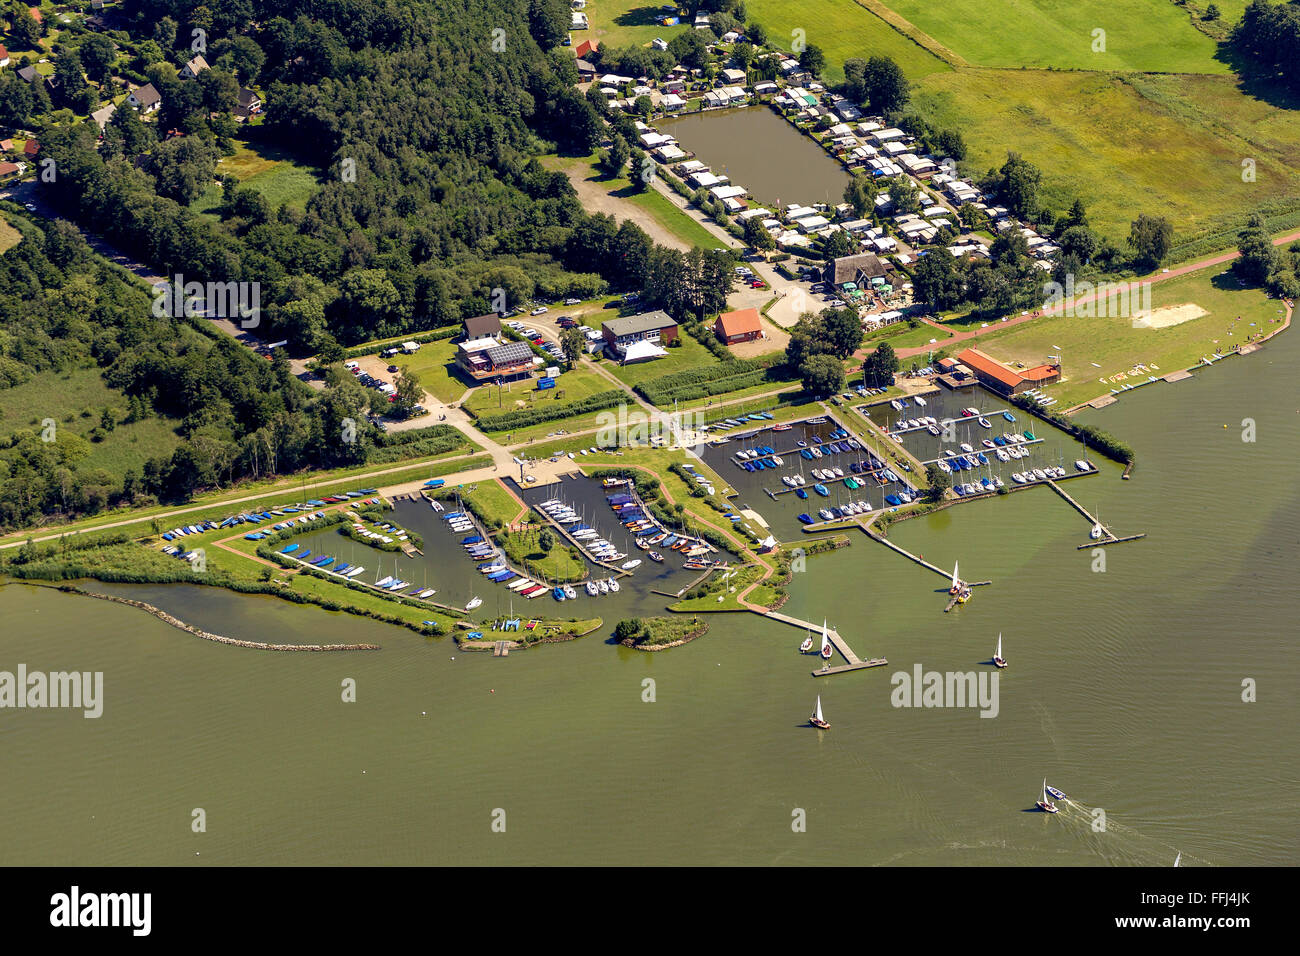 Aerial view, Lembruch, Dümmer, Dümmer See, North German lowland in Lower Hunte, Hude (Oldenburg), Lower Saxony, Europe, Aerial Stock Photo